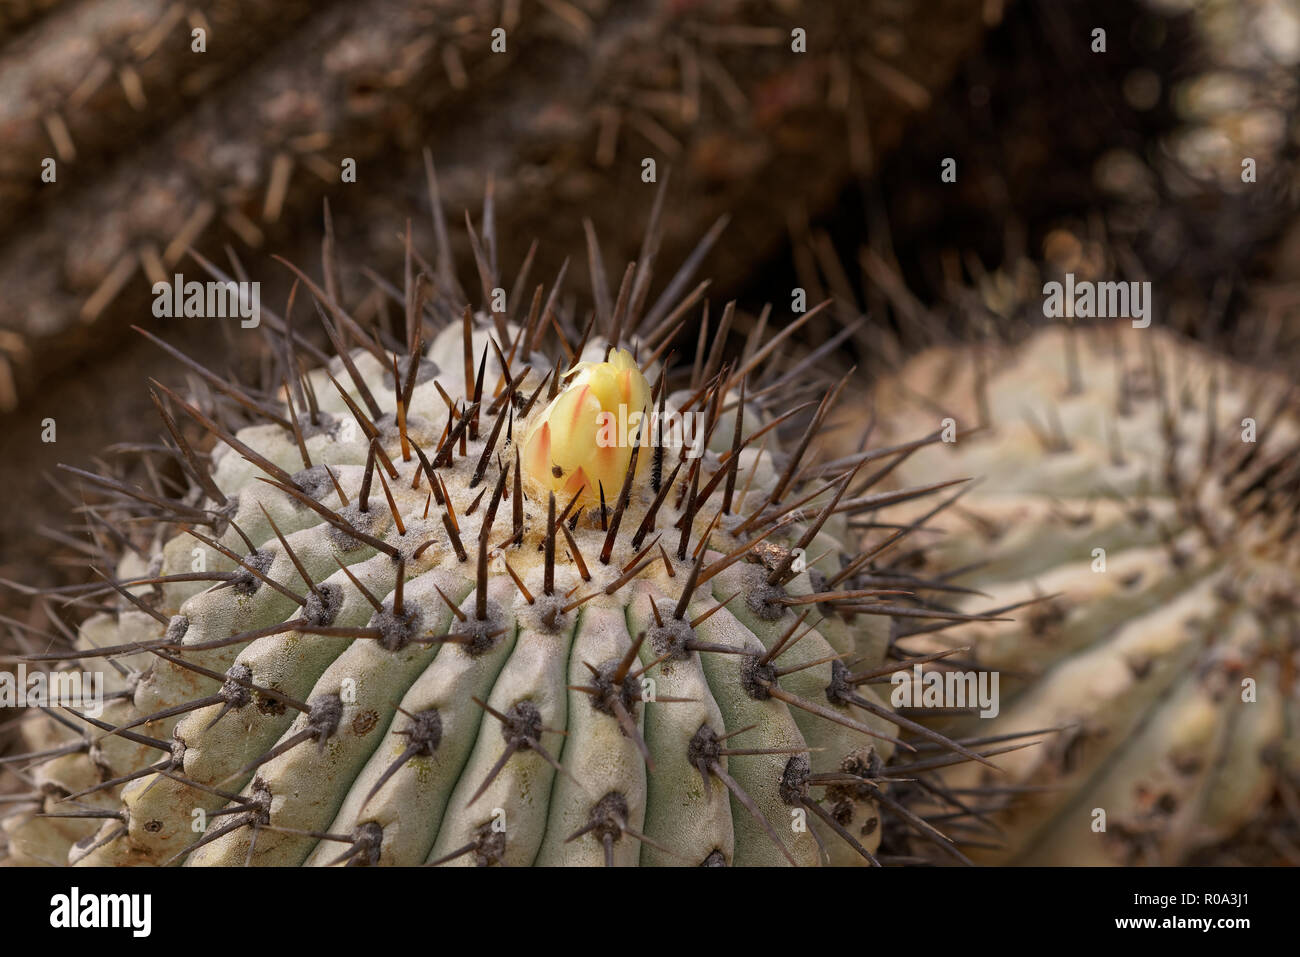 Copiapoa Marginata, it is one of the different types of cactus that grow in the Atacama desert. This image was captured in the vicinity of Copiapo Stock Photo